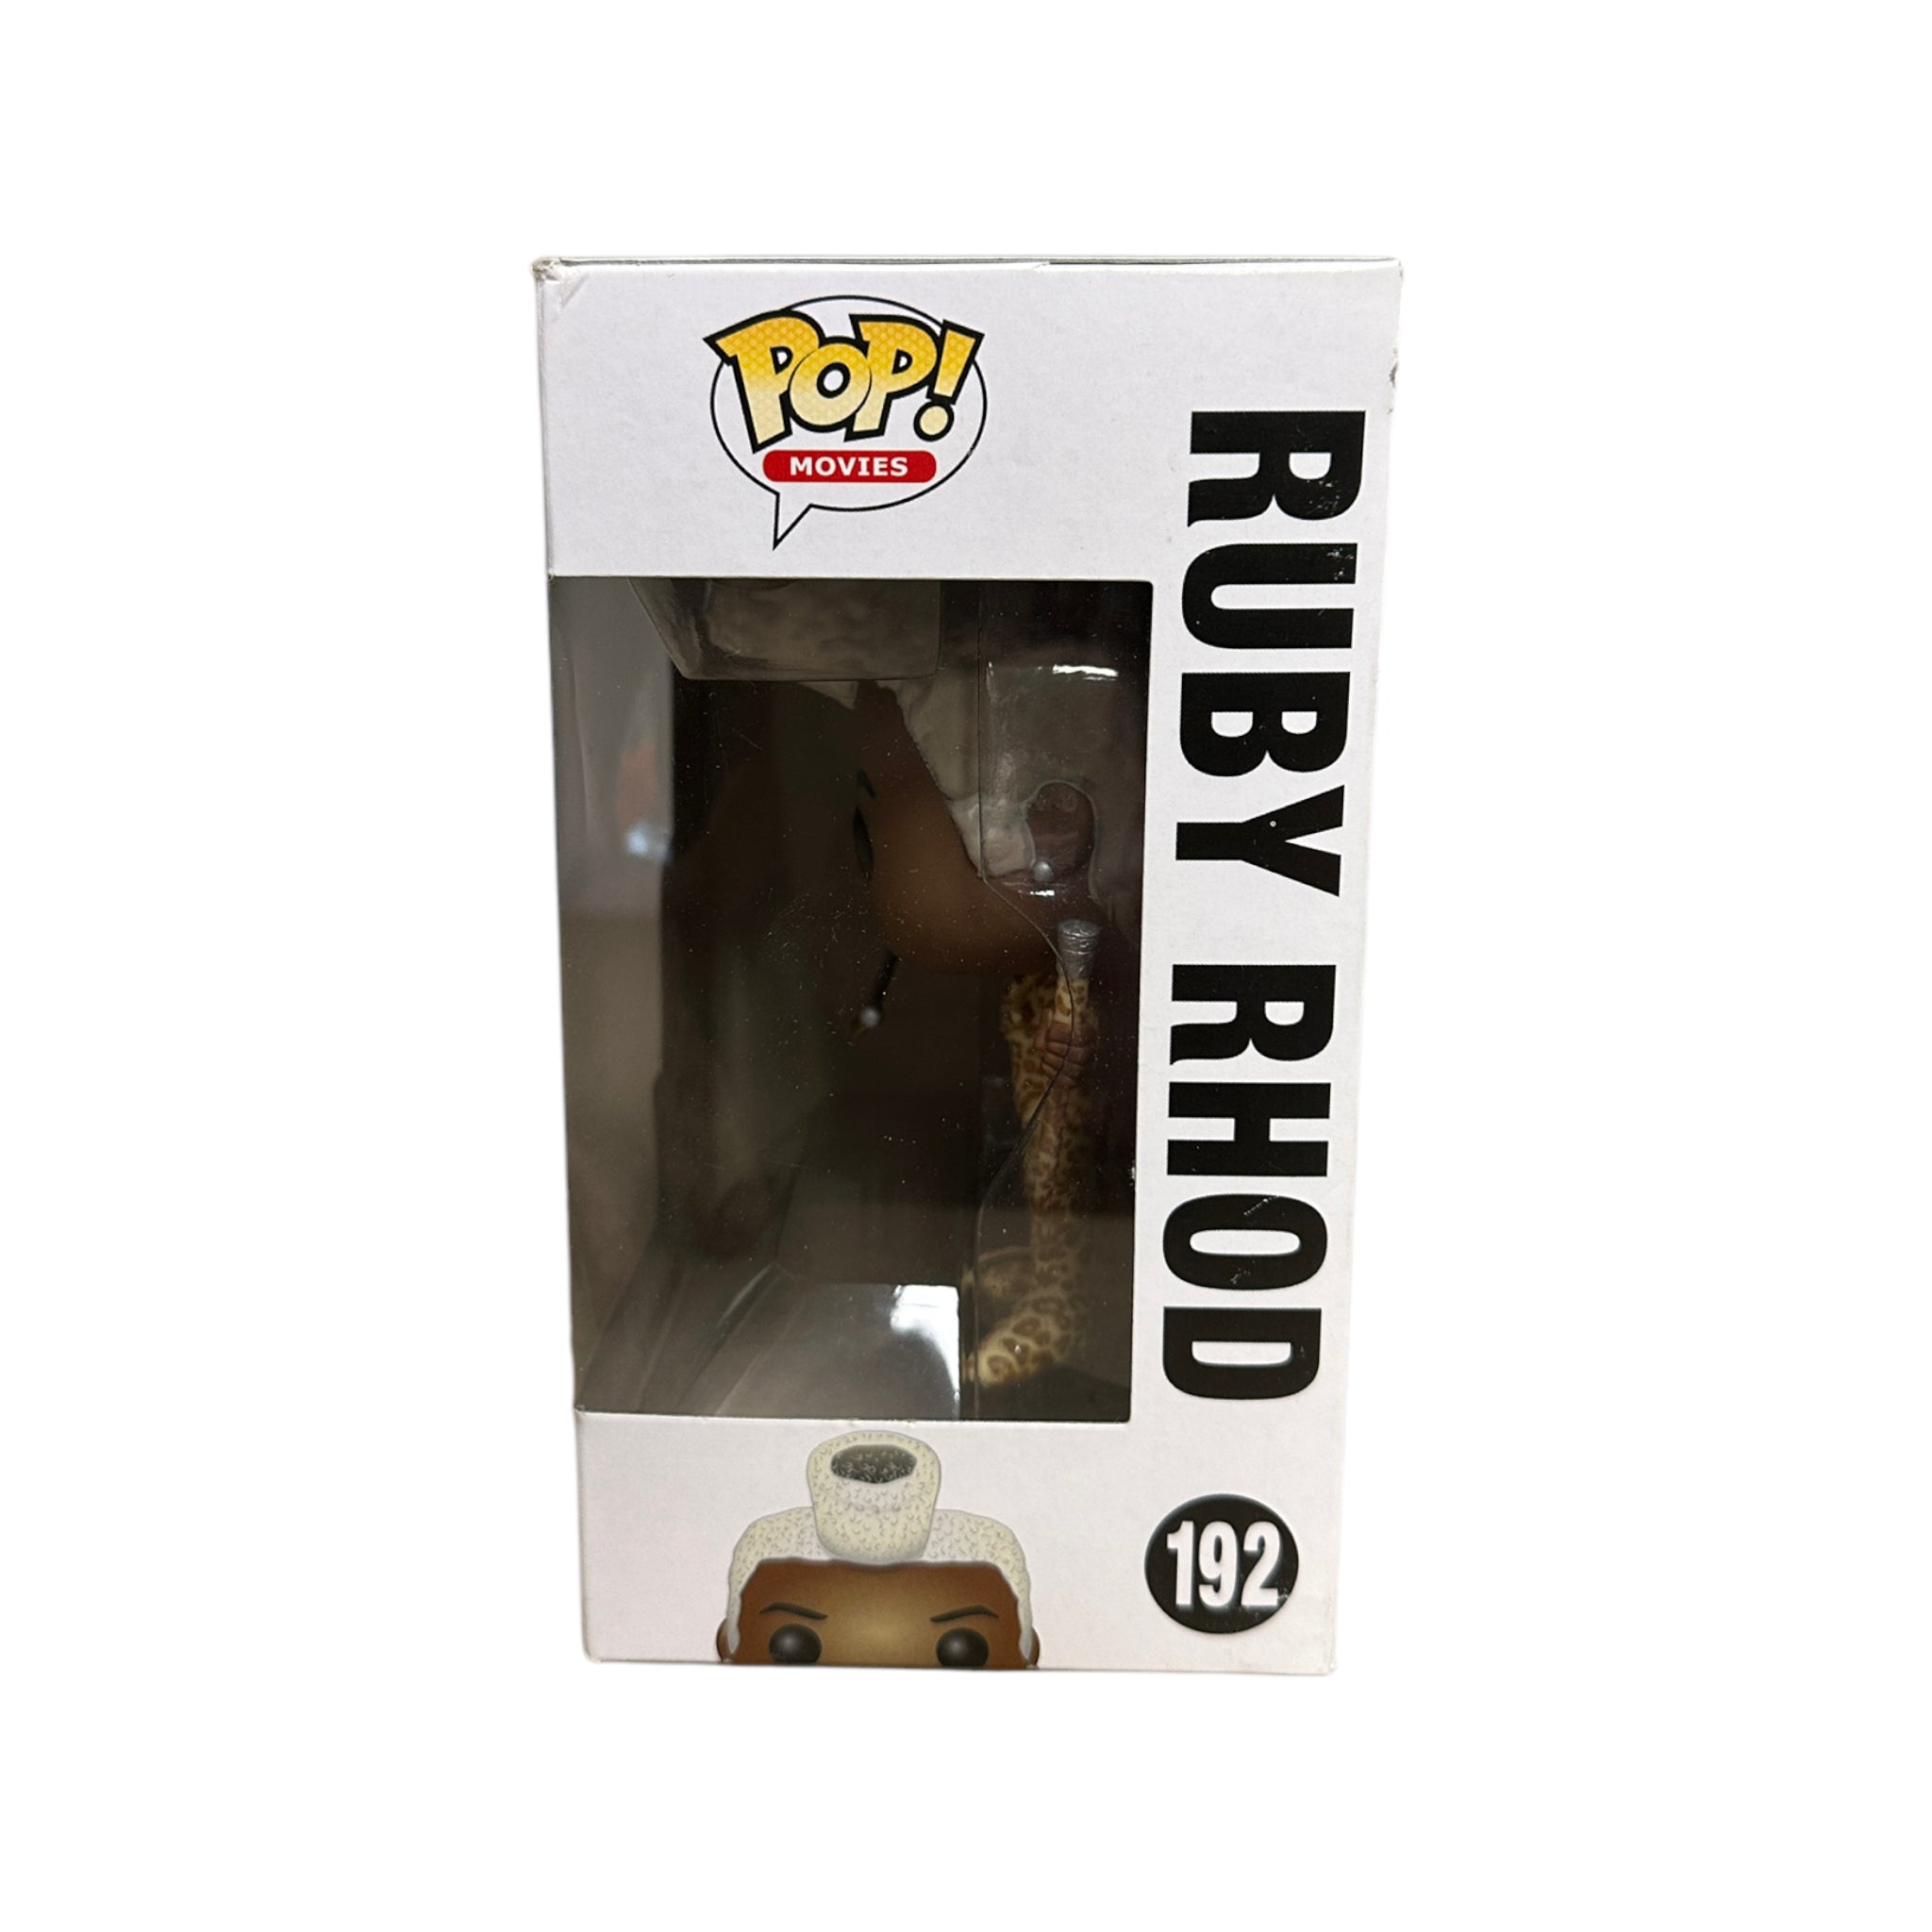 Ruby Rhod #192 Funko Pop! - The Fifth Element - 2015 Pop! - Condition 6/10